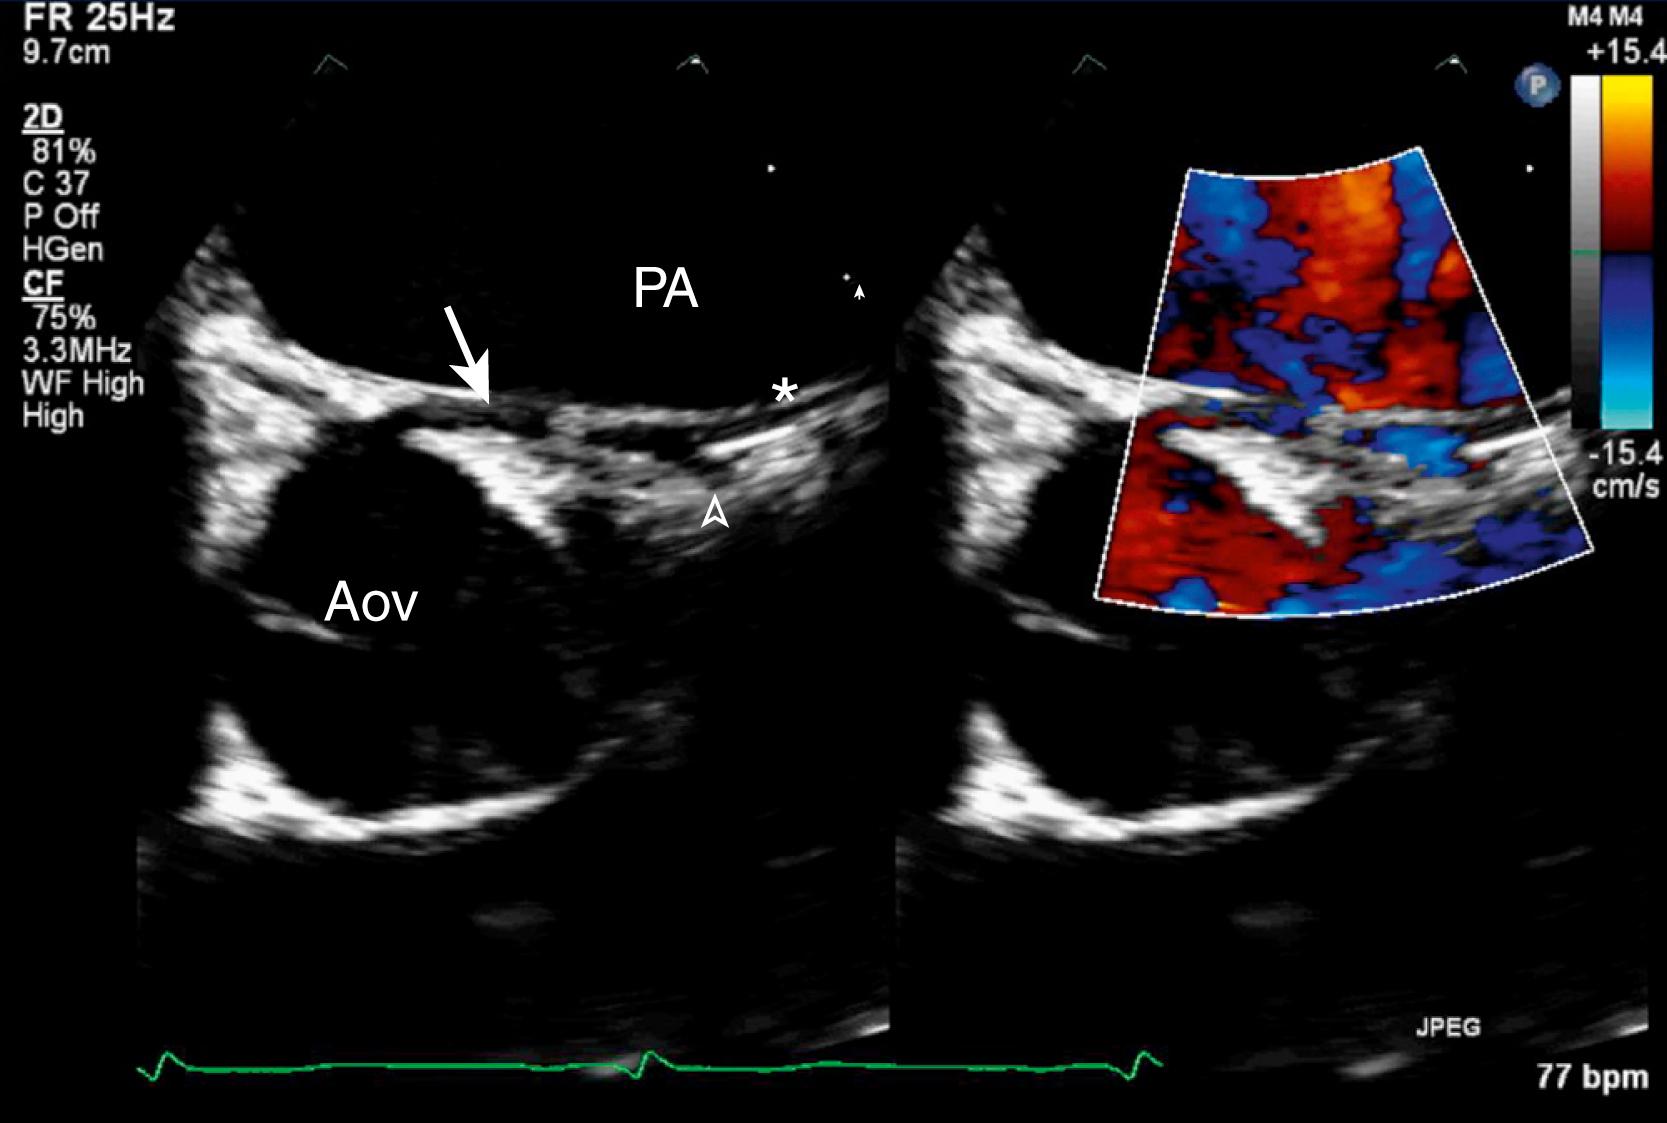 Figure 47.2, Parasternal short-axis view at the level of the aortic valve, clockwise rotated. The left coronary artery (CA) is seen arising from the right sinus of Valsalva with an interarterial course. The arrow is pointing at the anomalous left main CA, the asterisk indicates the left anterior descending CA, and the caret indicates the left circumflex CA. Aov, Aortic valve; PA, pulmonary artery. (See corresponding Video 47.2 .)